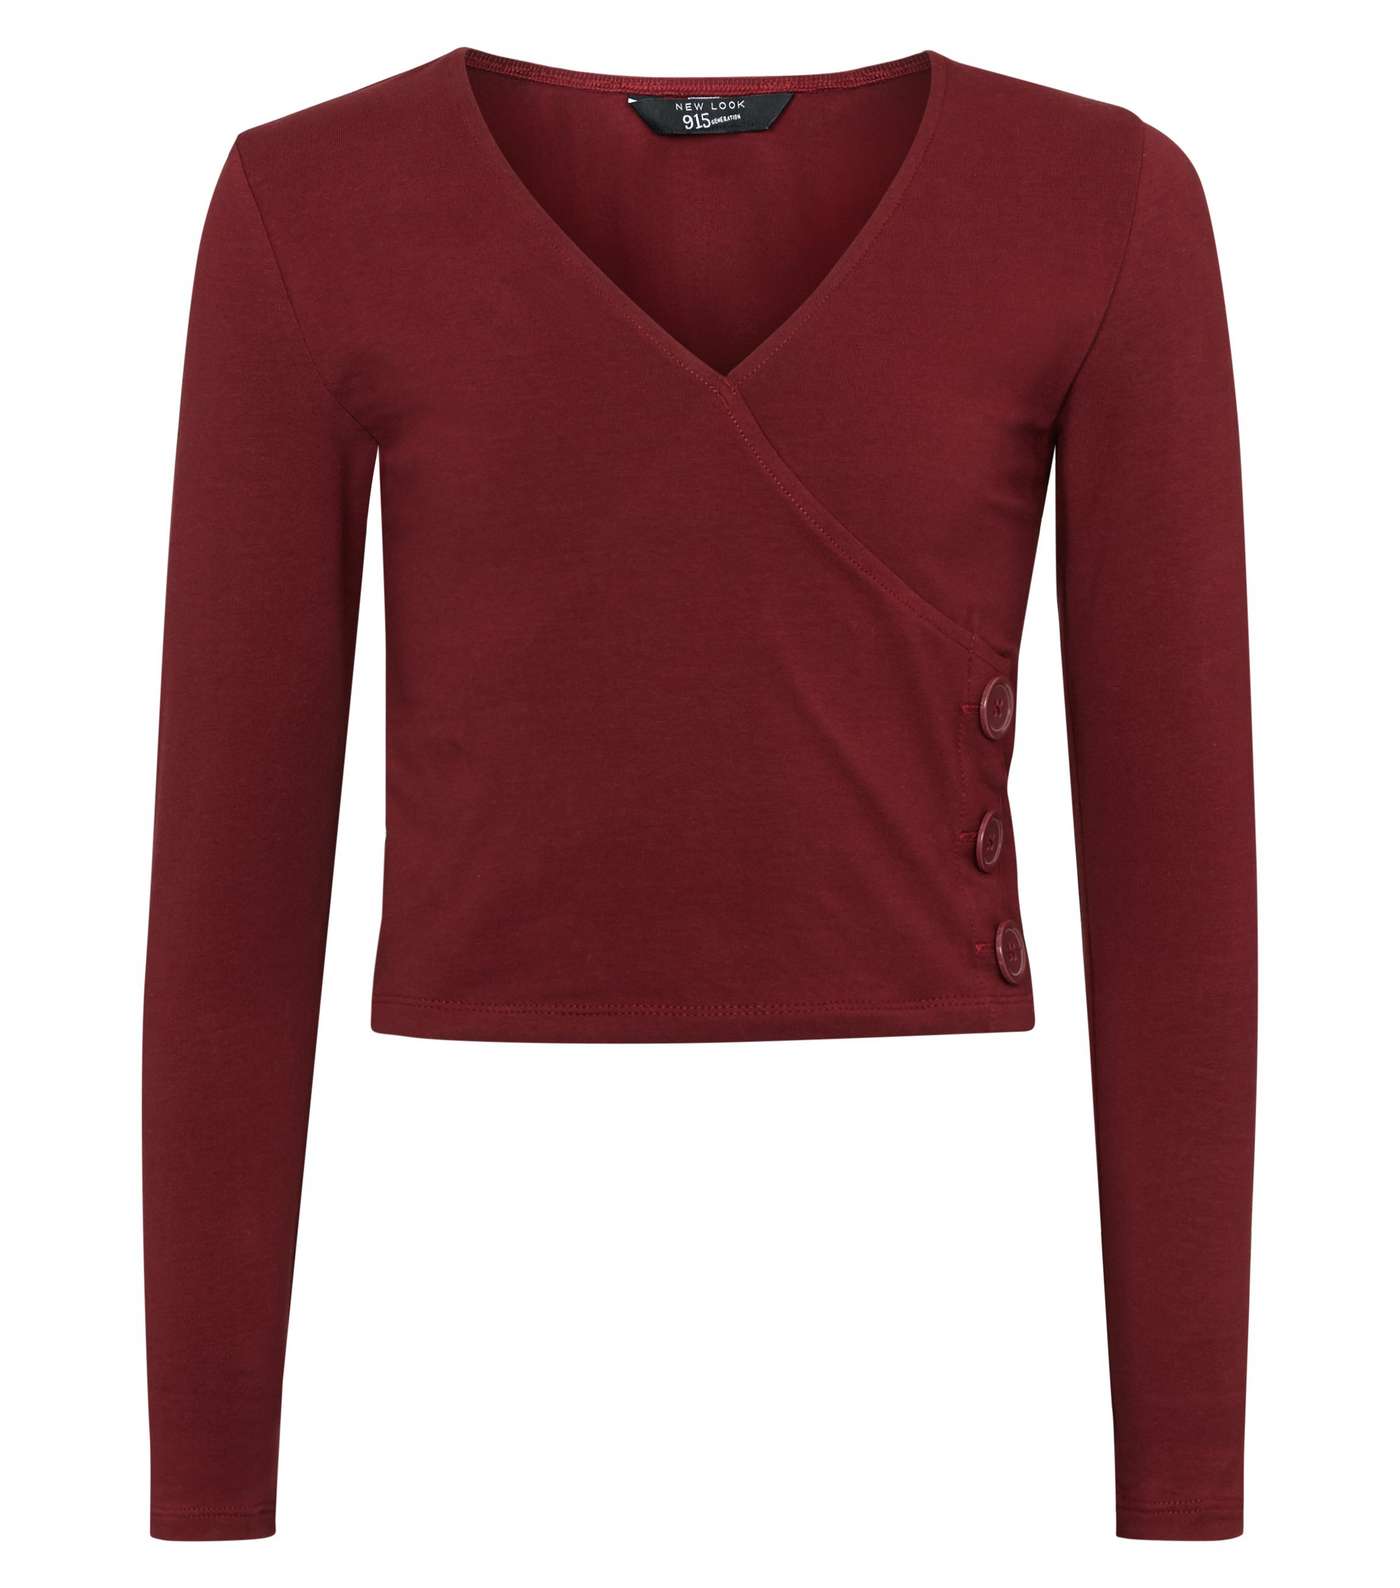 Girls Burgundy Long Sleeve Button Side Top Image 4